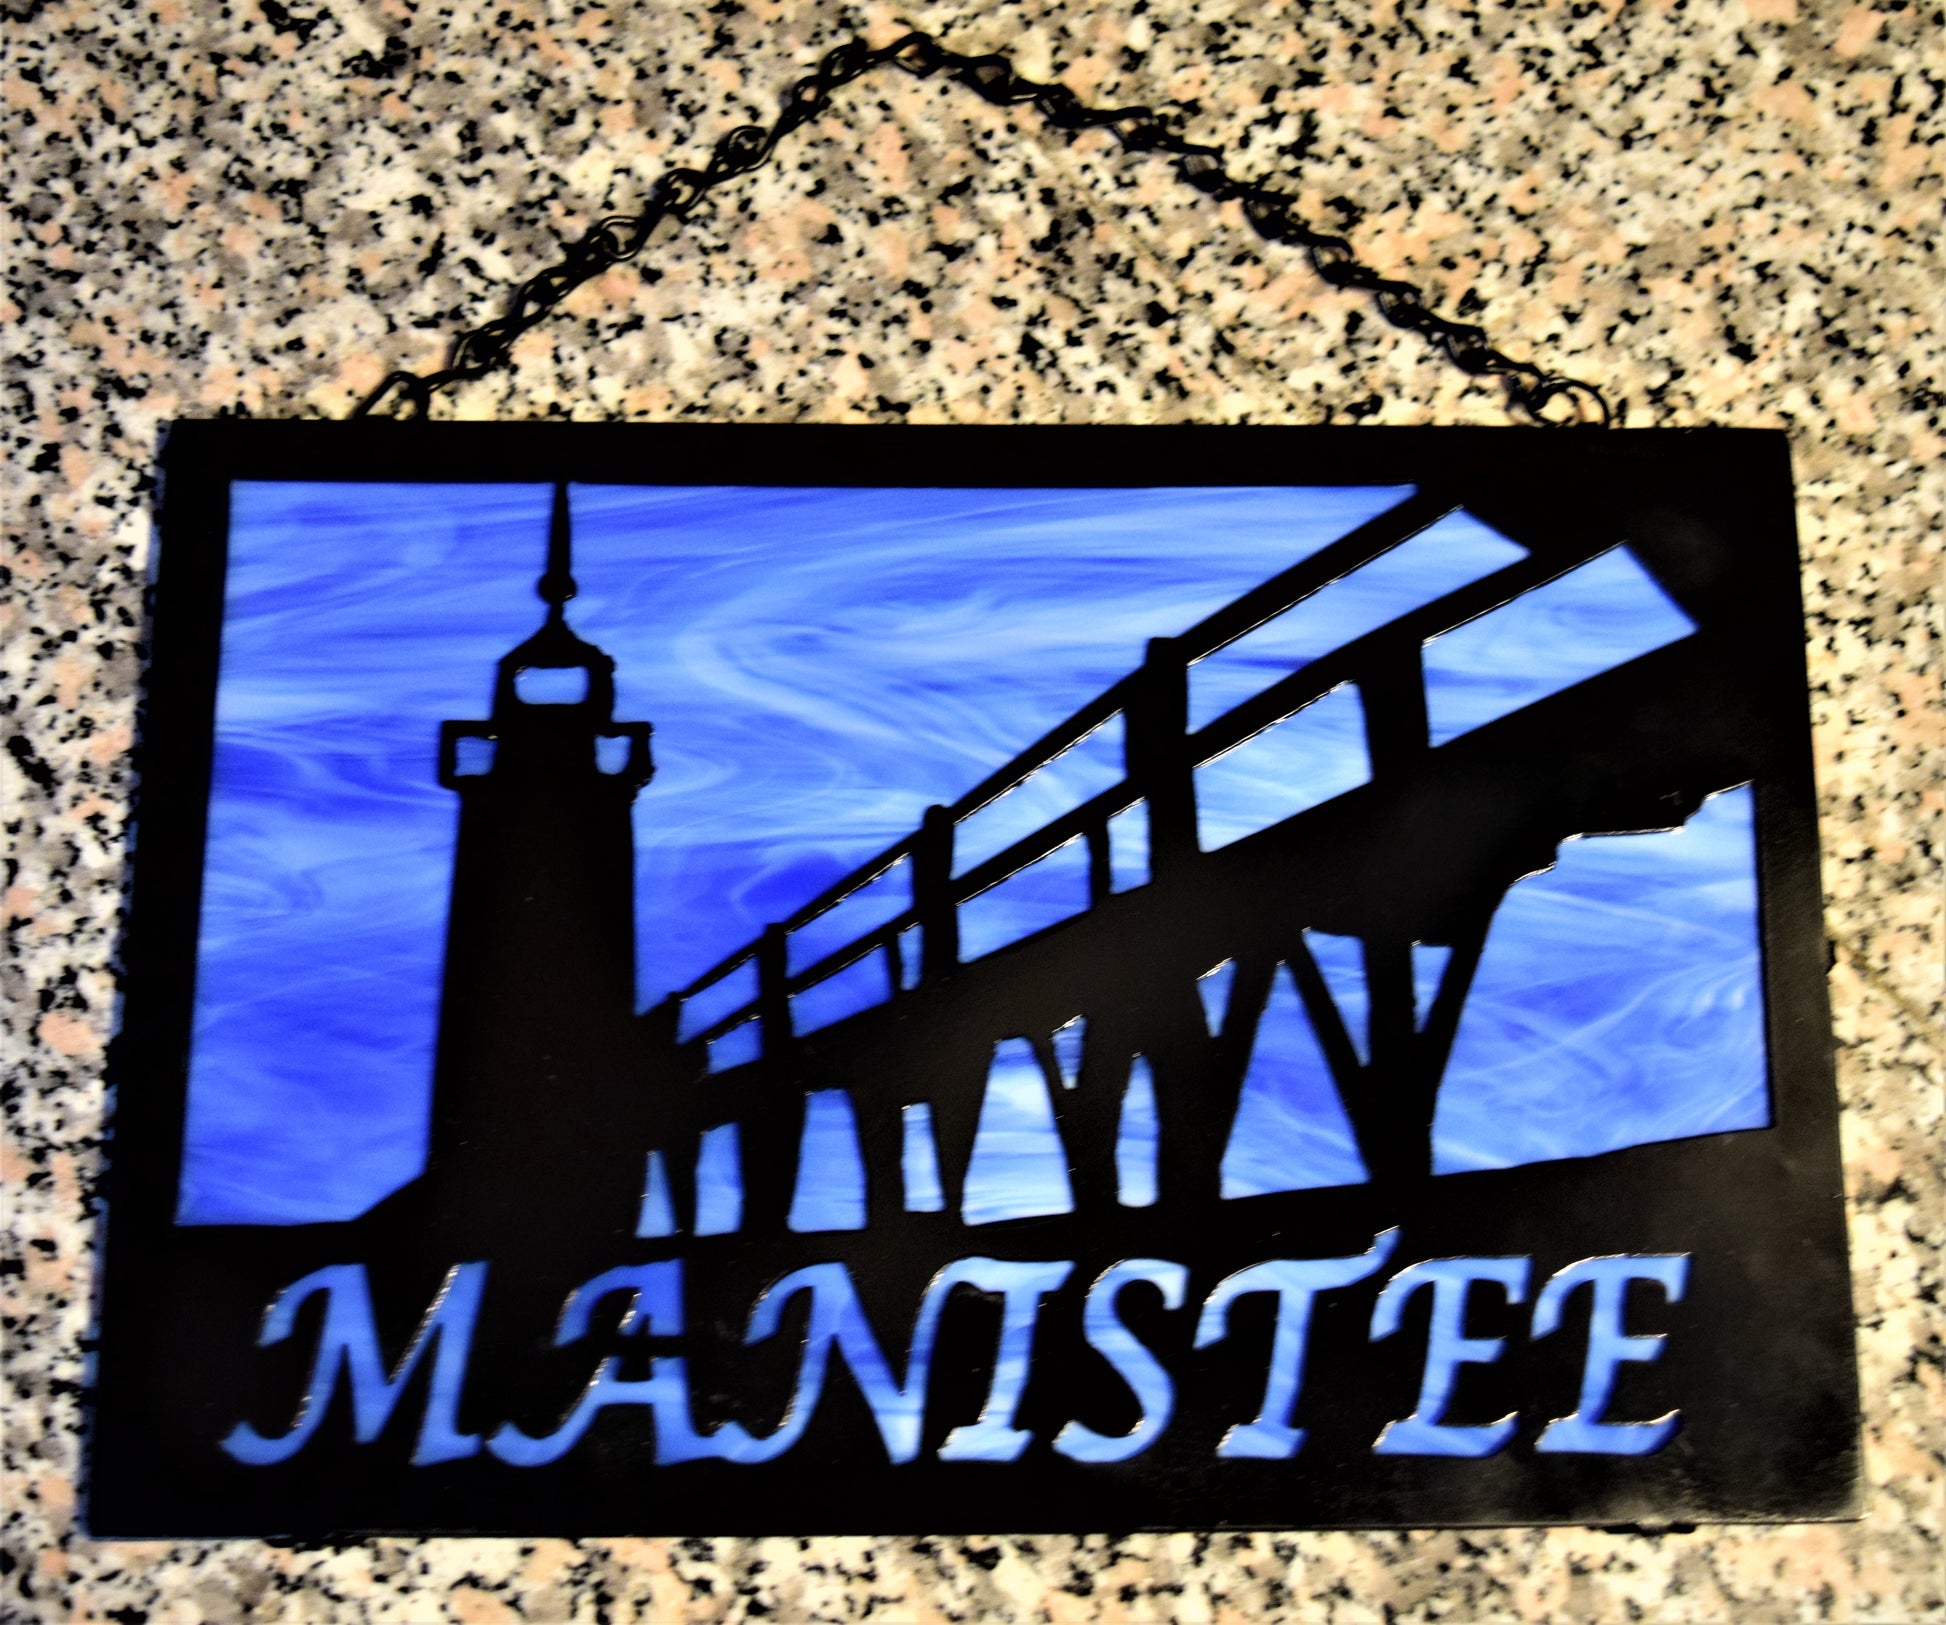 Black custom metal featuring Manistee Michigan lighthouse with Manistee spelled out beneath lighthouse image. With blue background. 